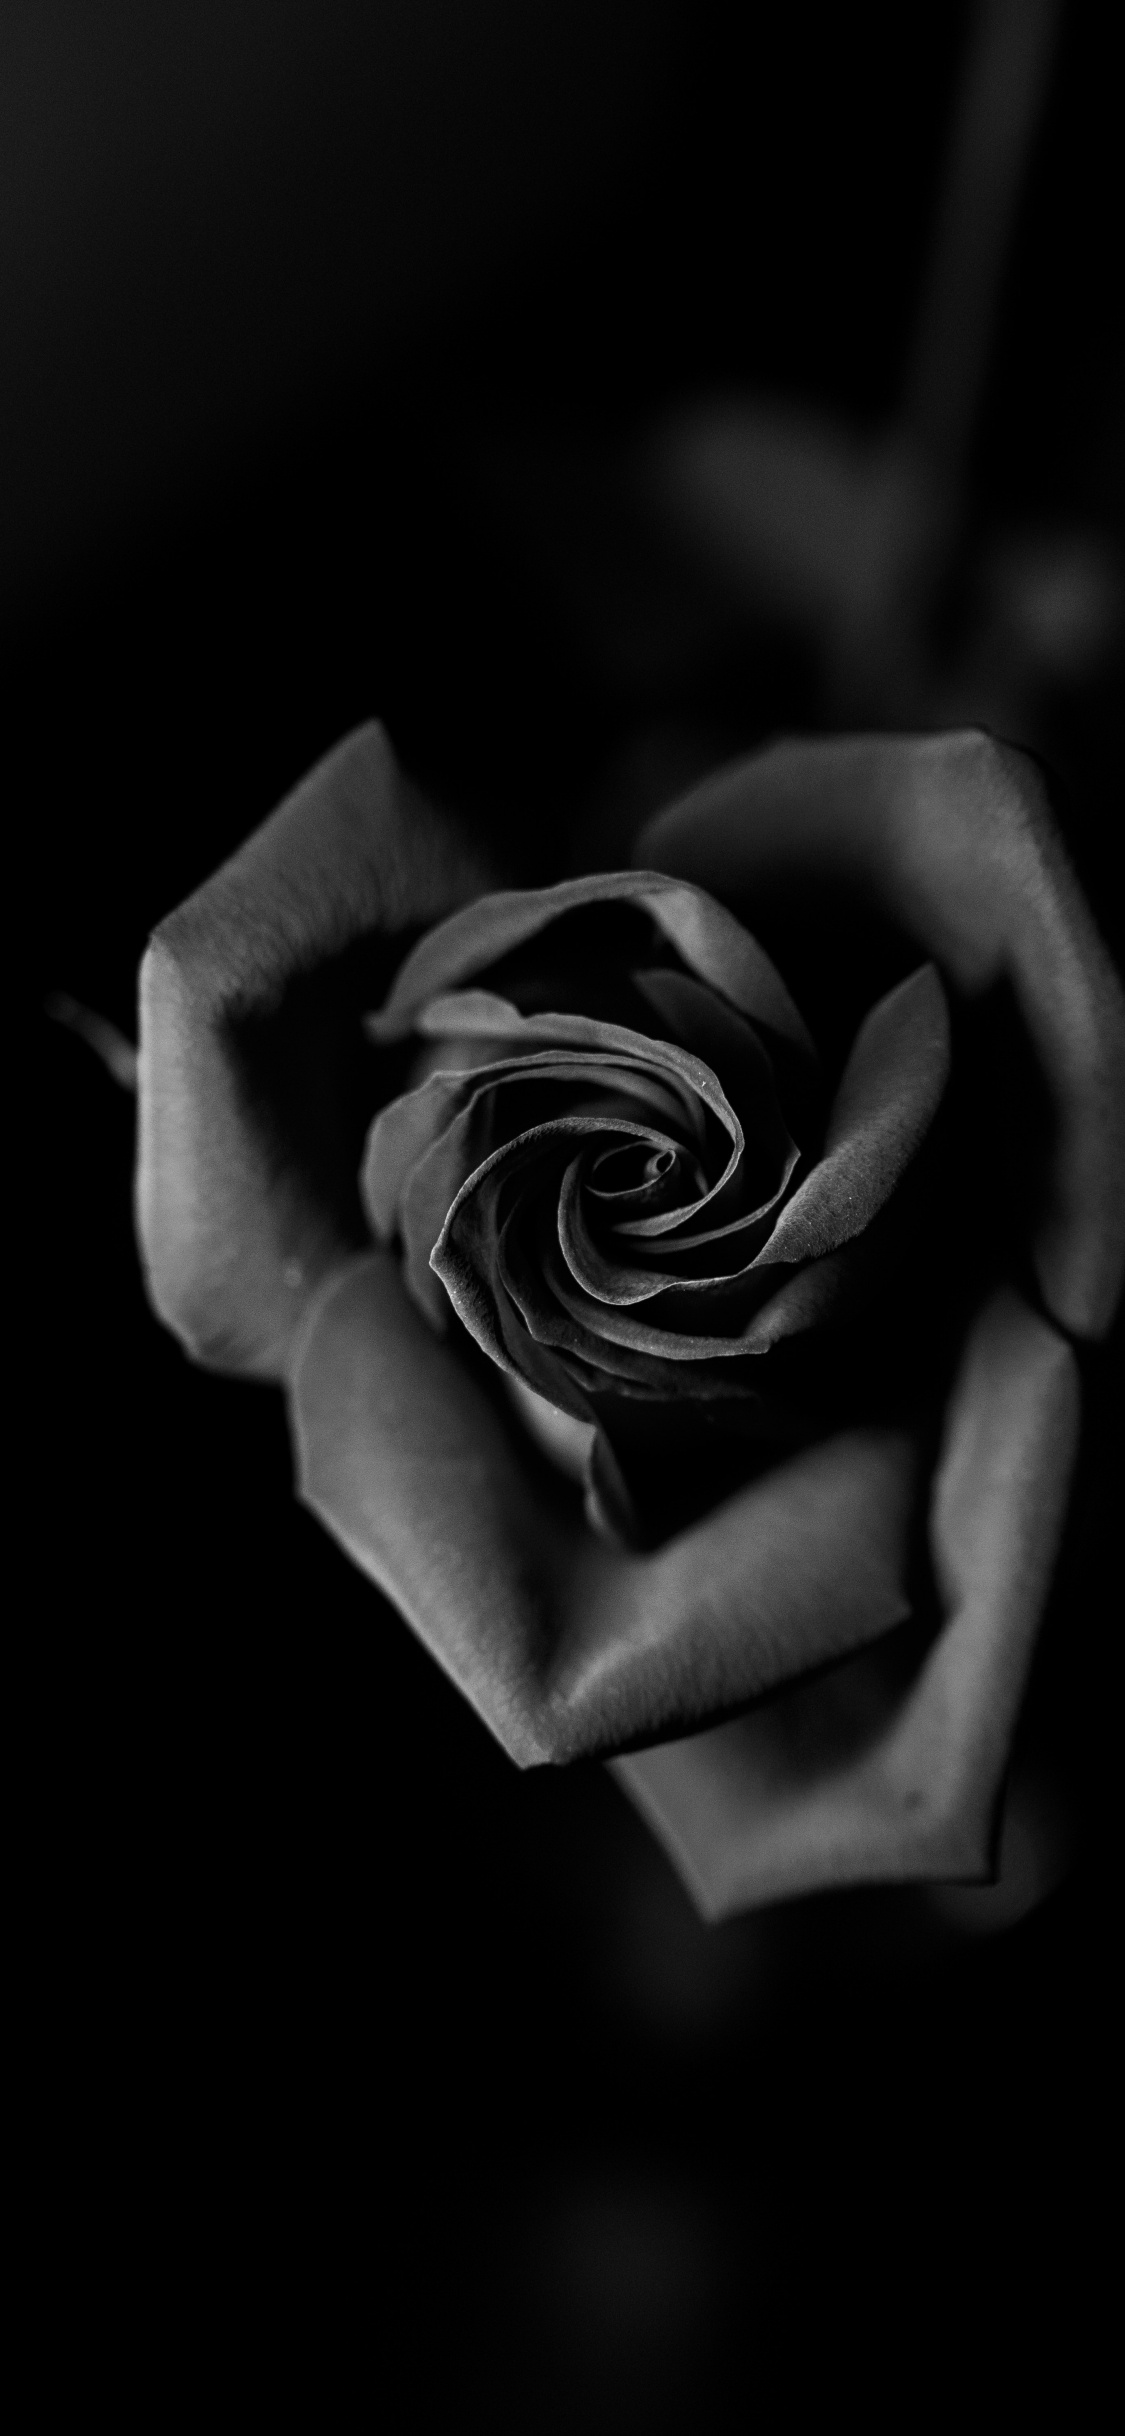 Grayscale Photo of Rose Flower. Wallpaper in 1125x2436 Resolution